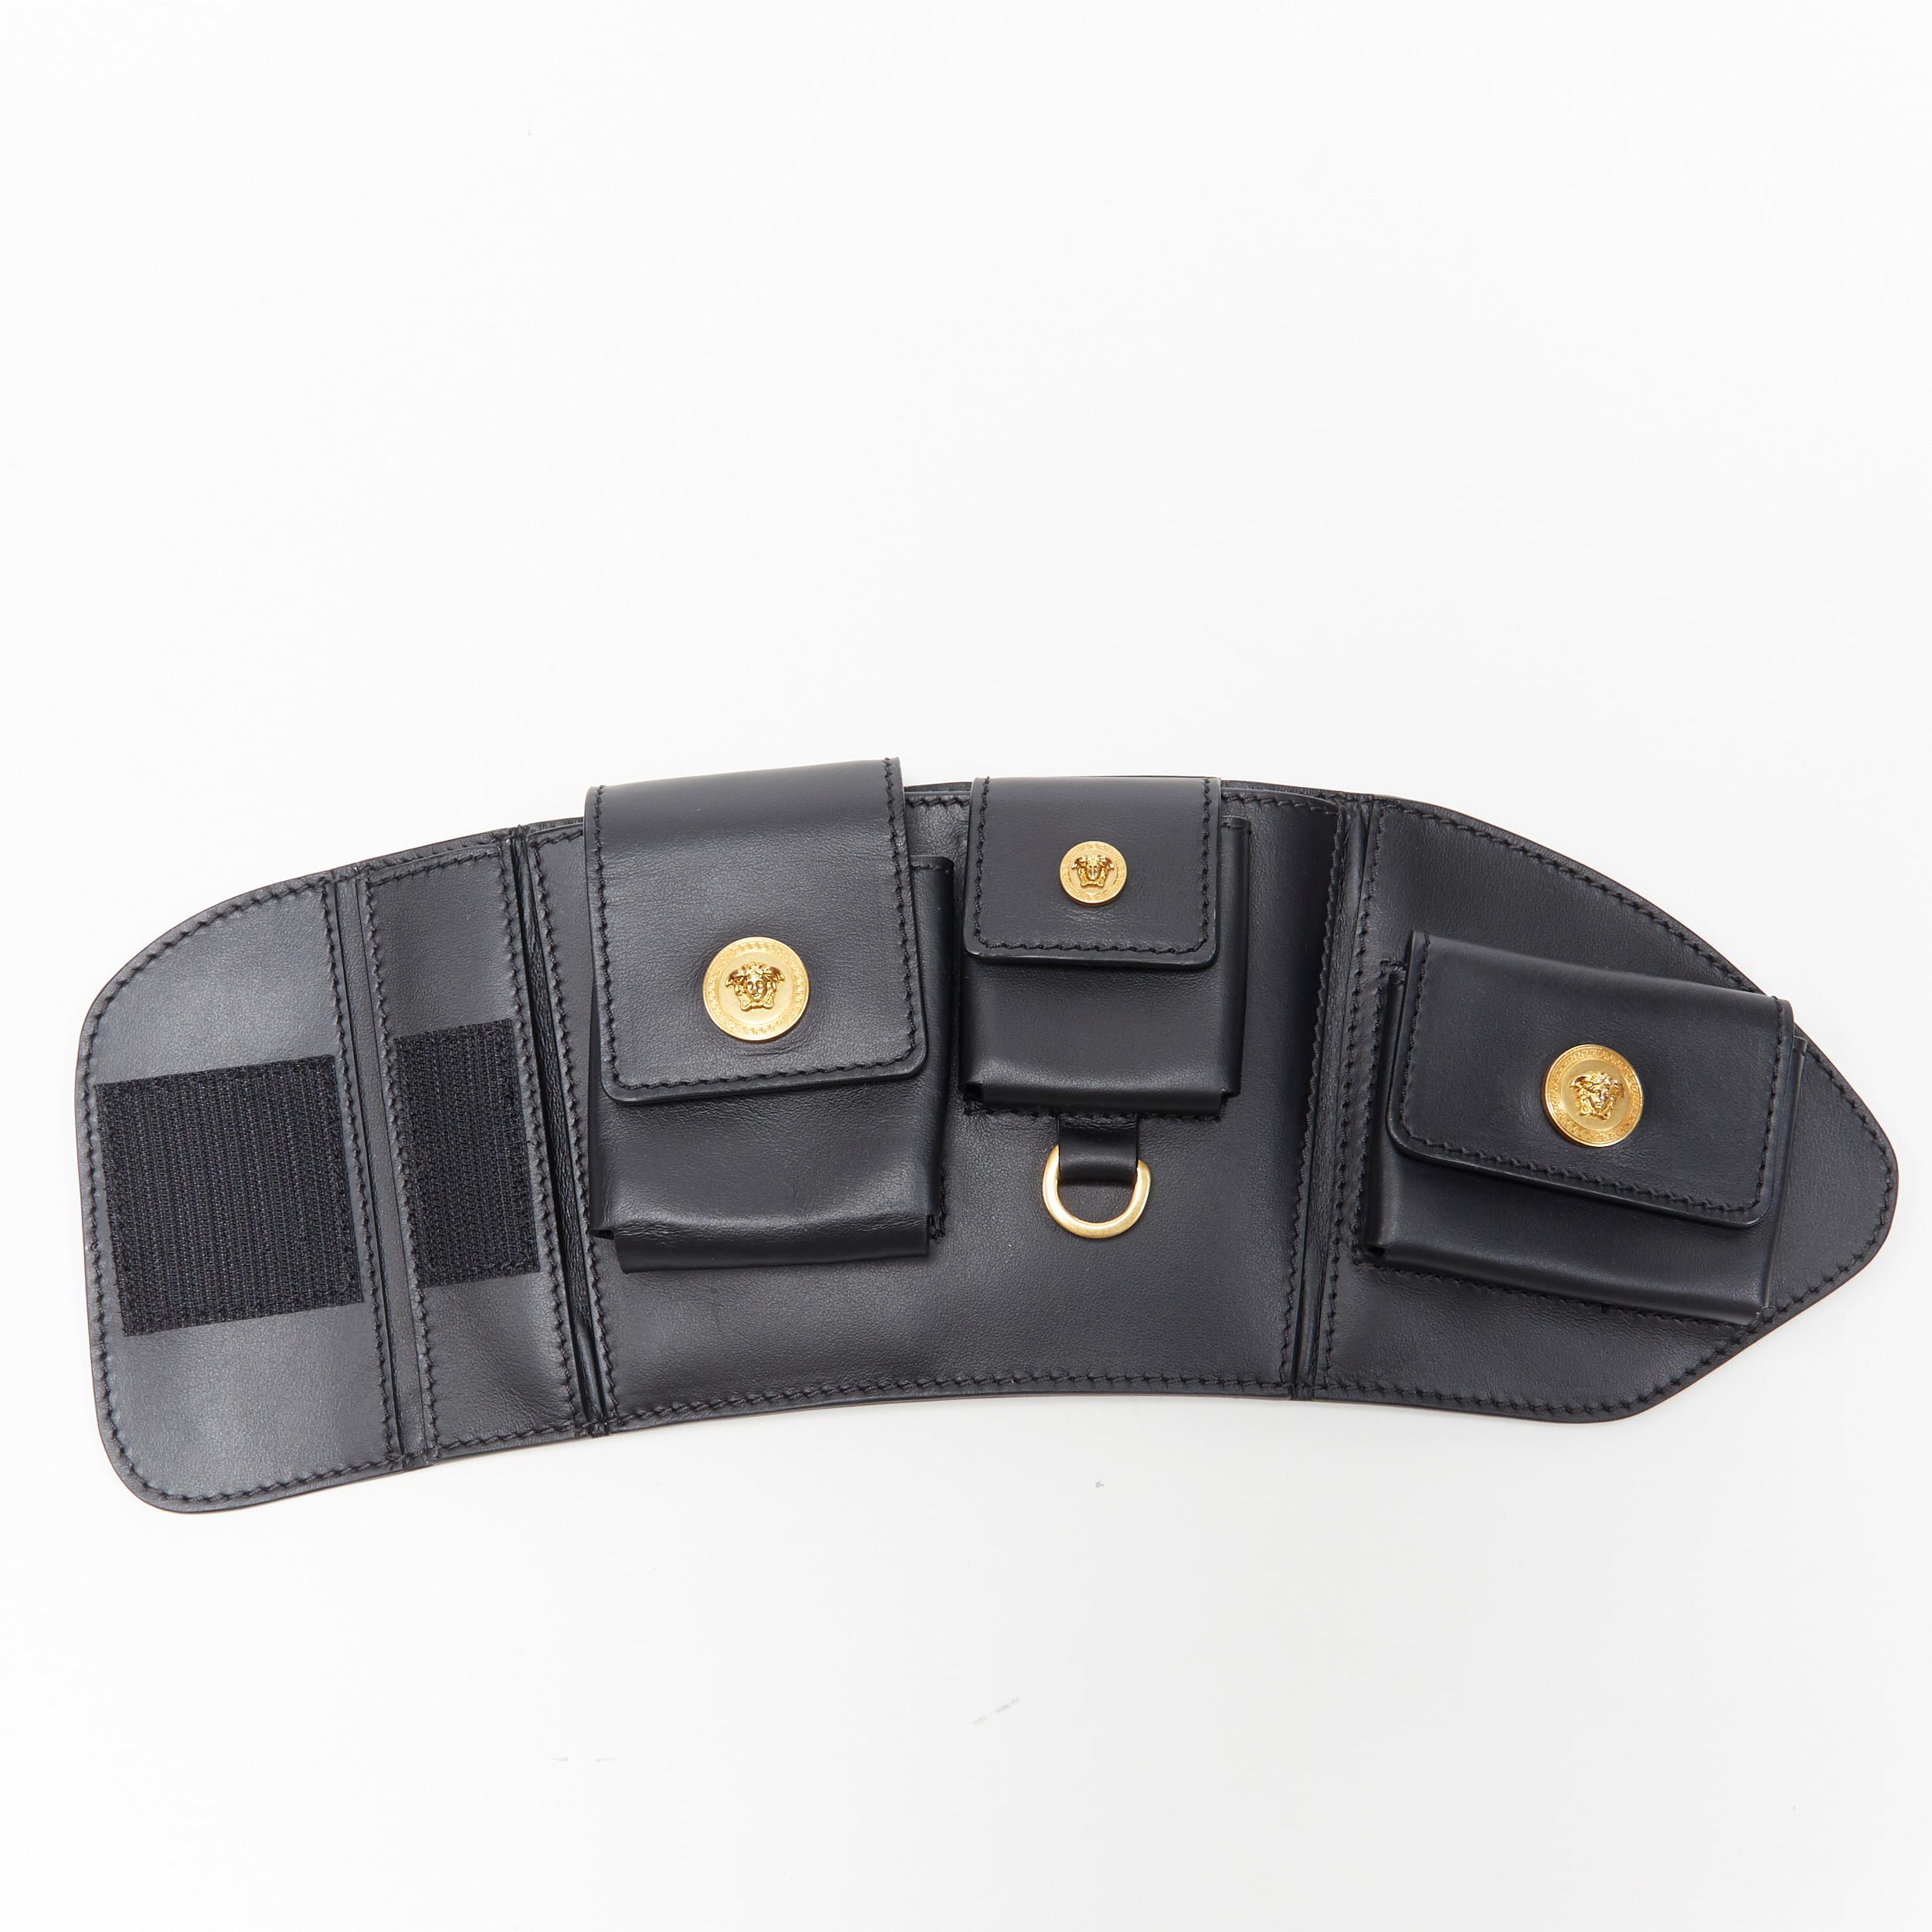 new VERSACE 2019 Runway black gold Medusa multipocket harness arm bag Rare
Brand: Versace
Designer: Donatella Versace
Collection: Pre-Fall 2019
Model Name / Style: Arm bag
Material: Leather
Color: Black
Pattern: Solid
Closure: Button
Extra Detail: